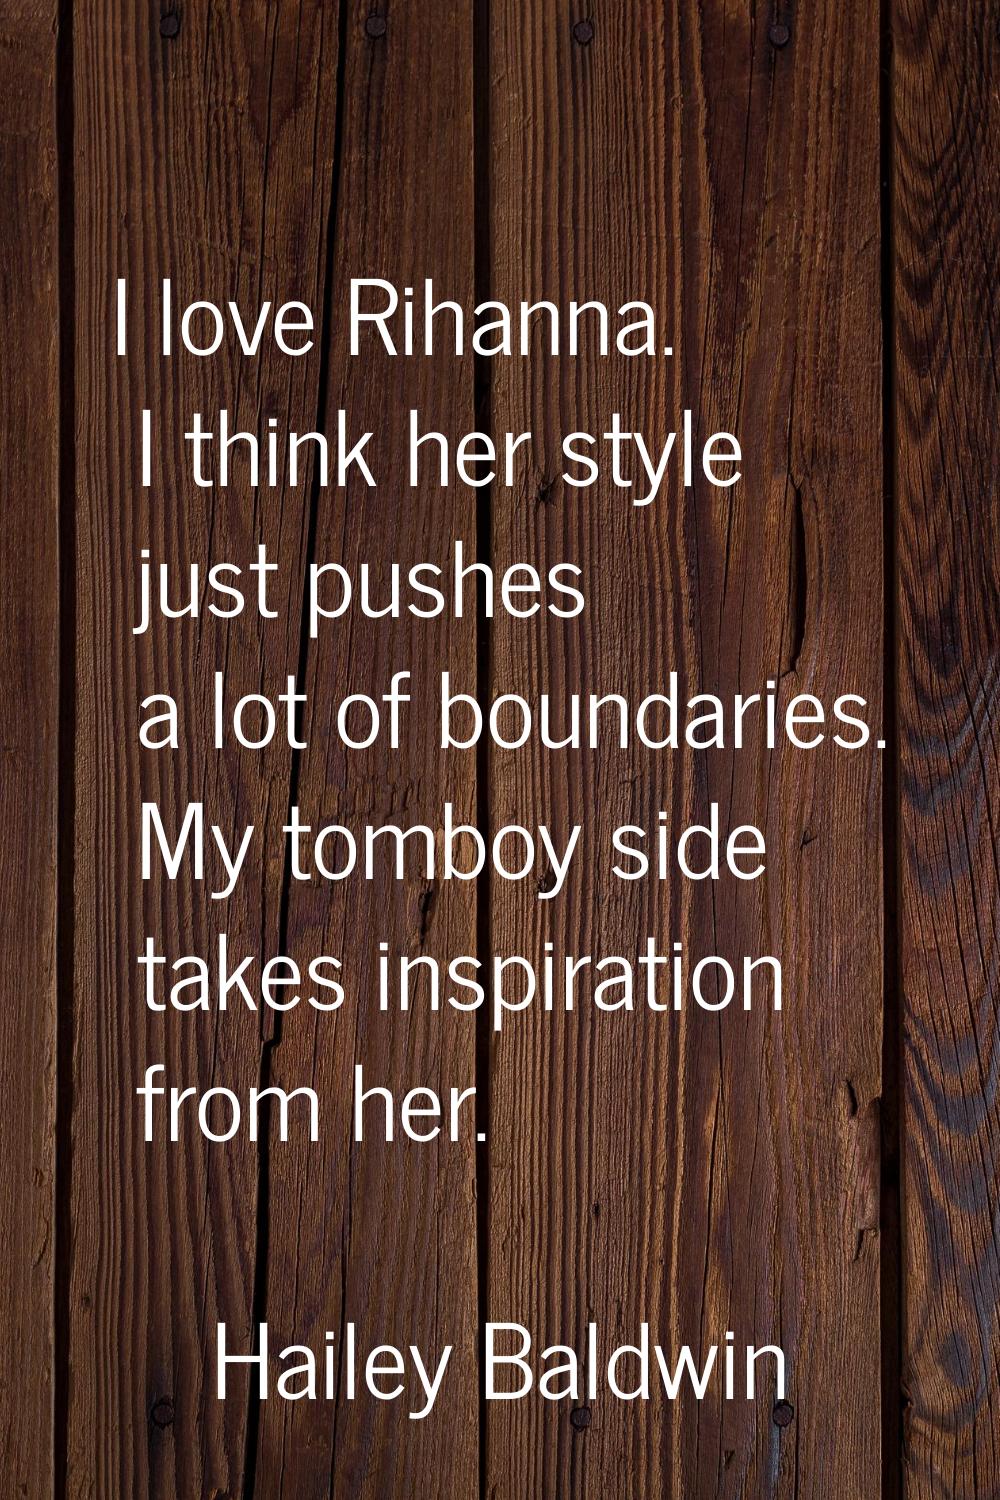 I love Rihanna. I think her style just pushes a lot of boundaries. My tomboy side takes inspiration